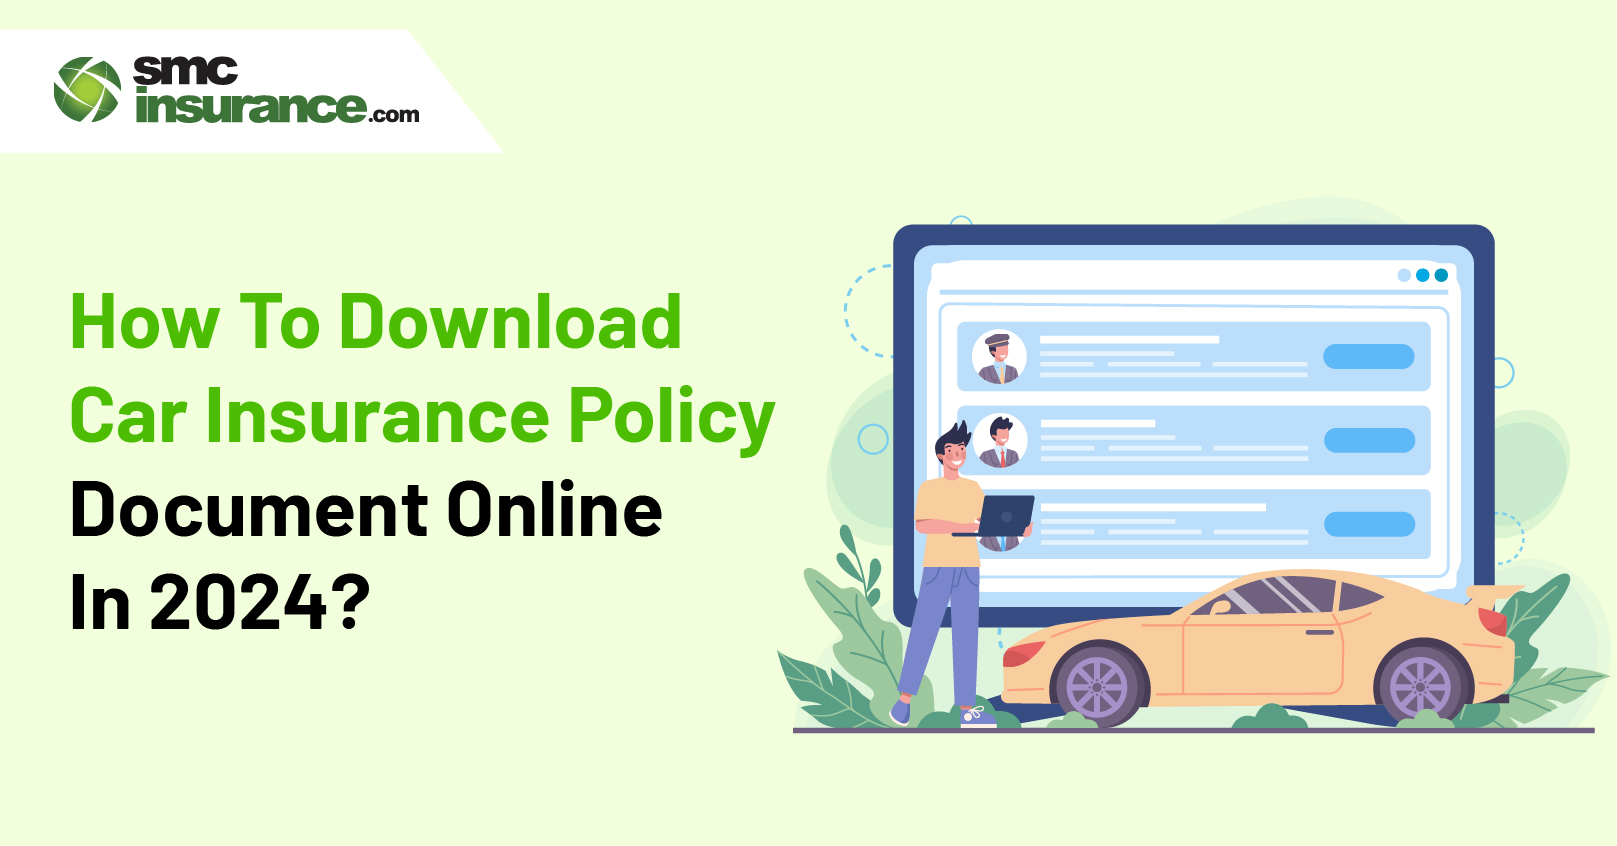 How To Download Car Insurance Policy Document Online In 2024?